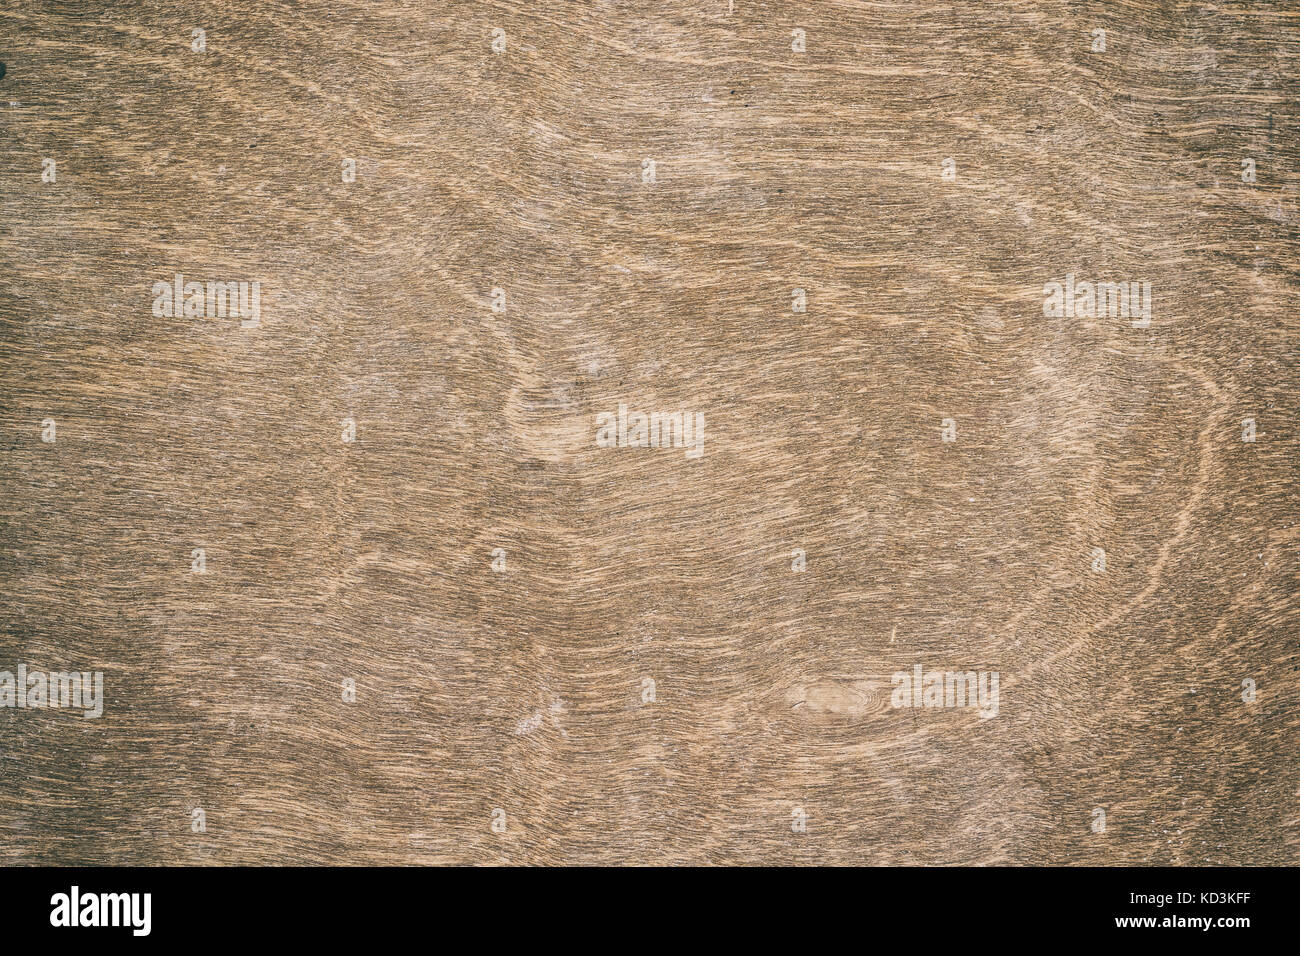 Vintage surface wood table and rustic grain texture background. Close up of dark rustic wall made of old wood table planks texture. Rustic brown wood  Stock Photo